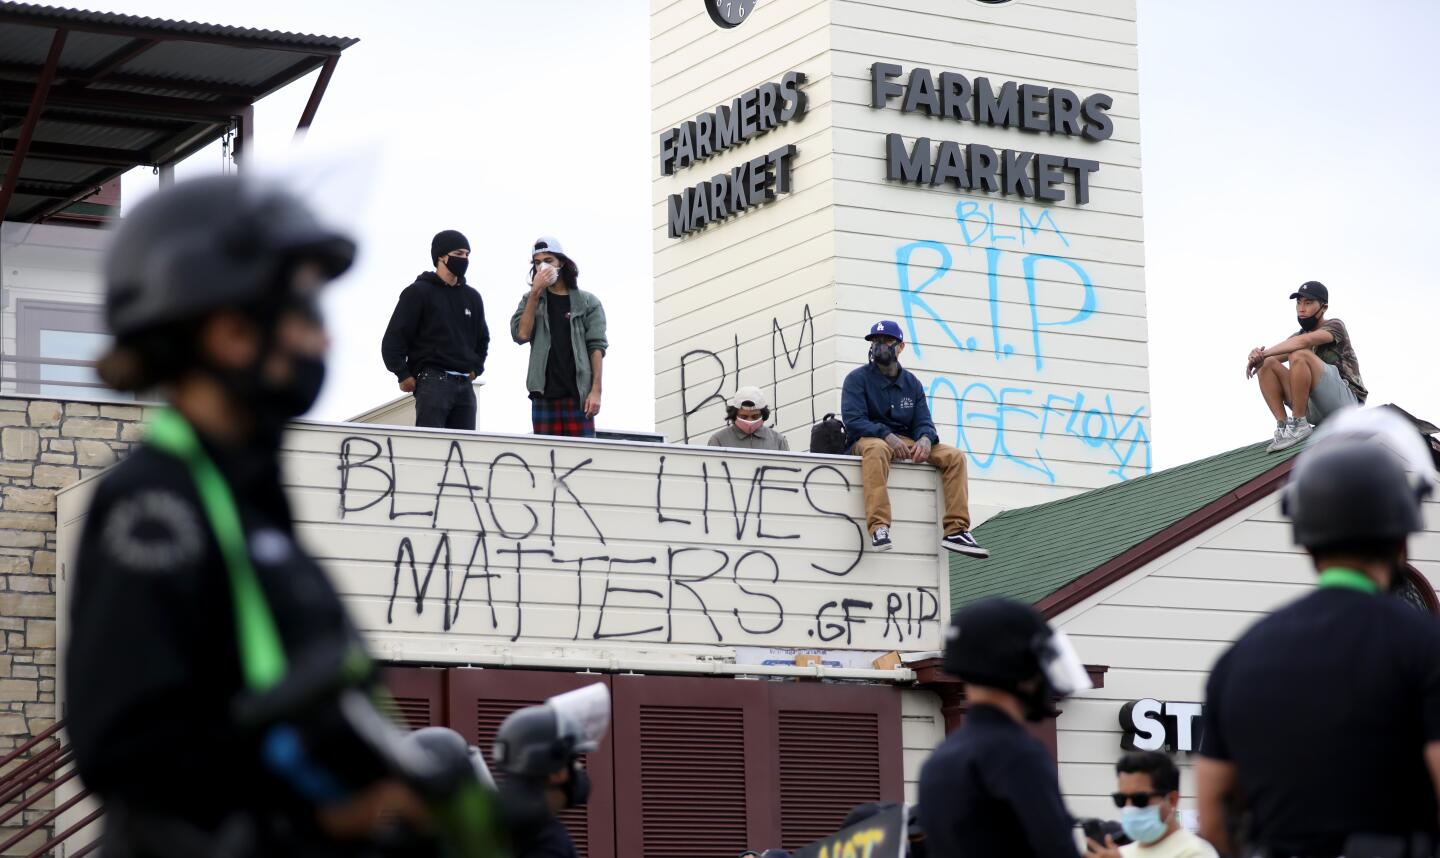 Los Angeles police contain protesters at the Farmers Market